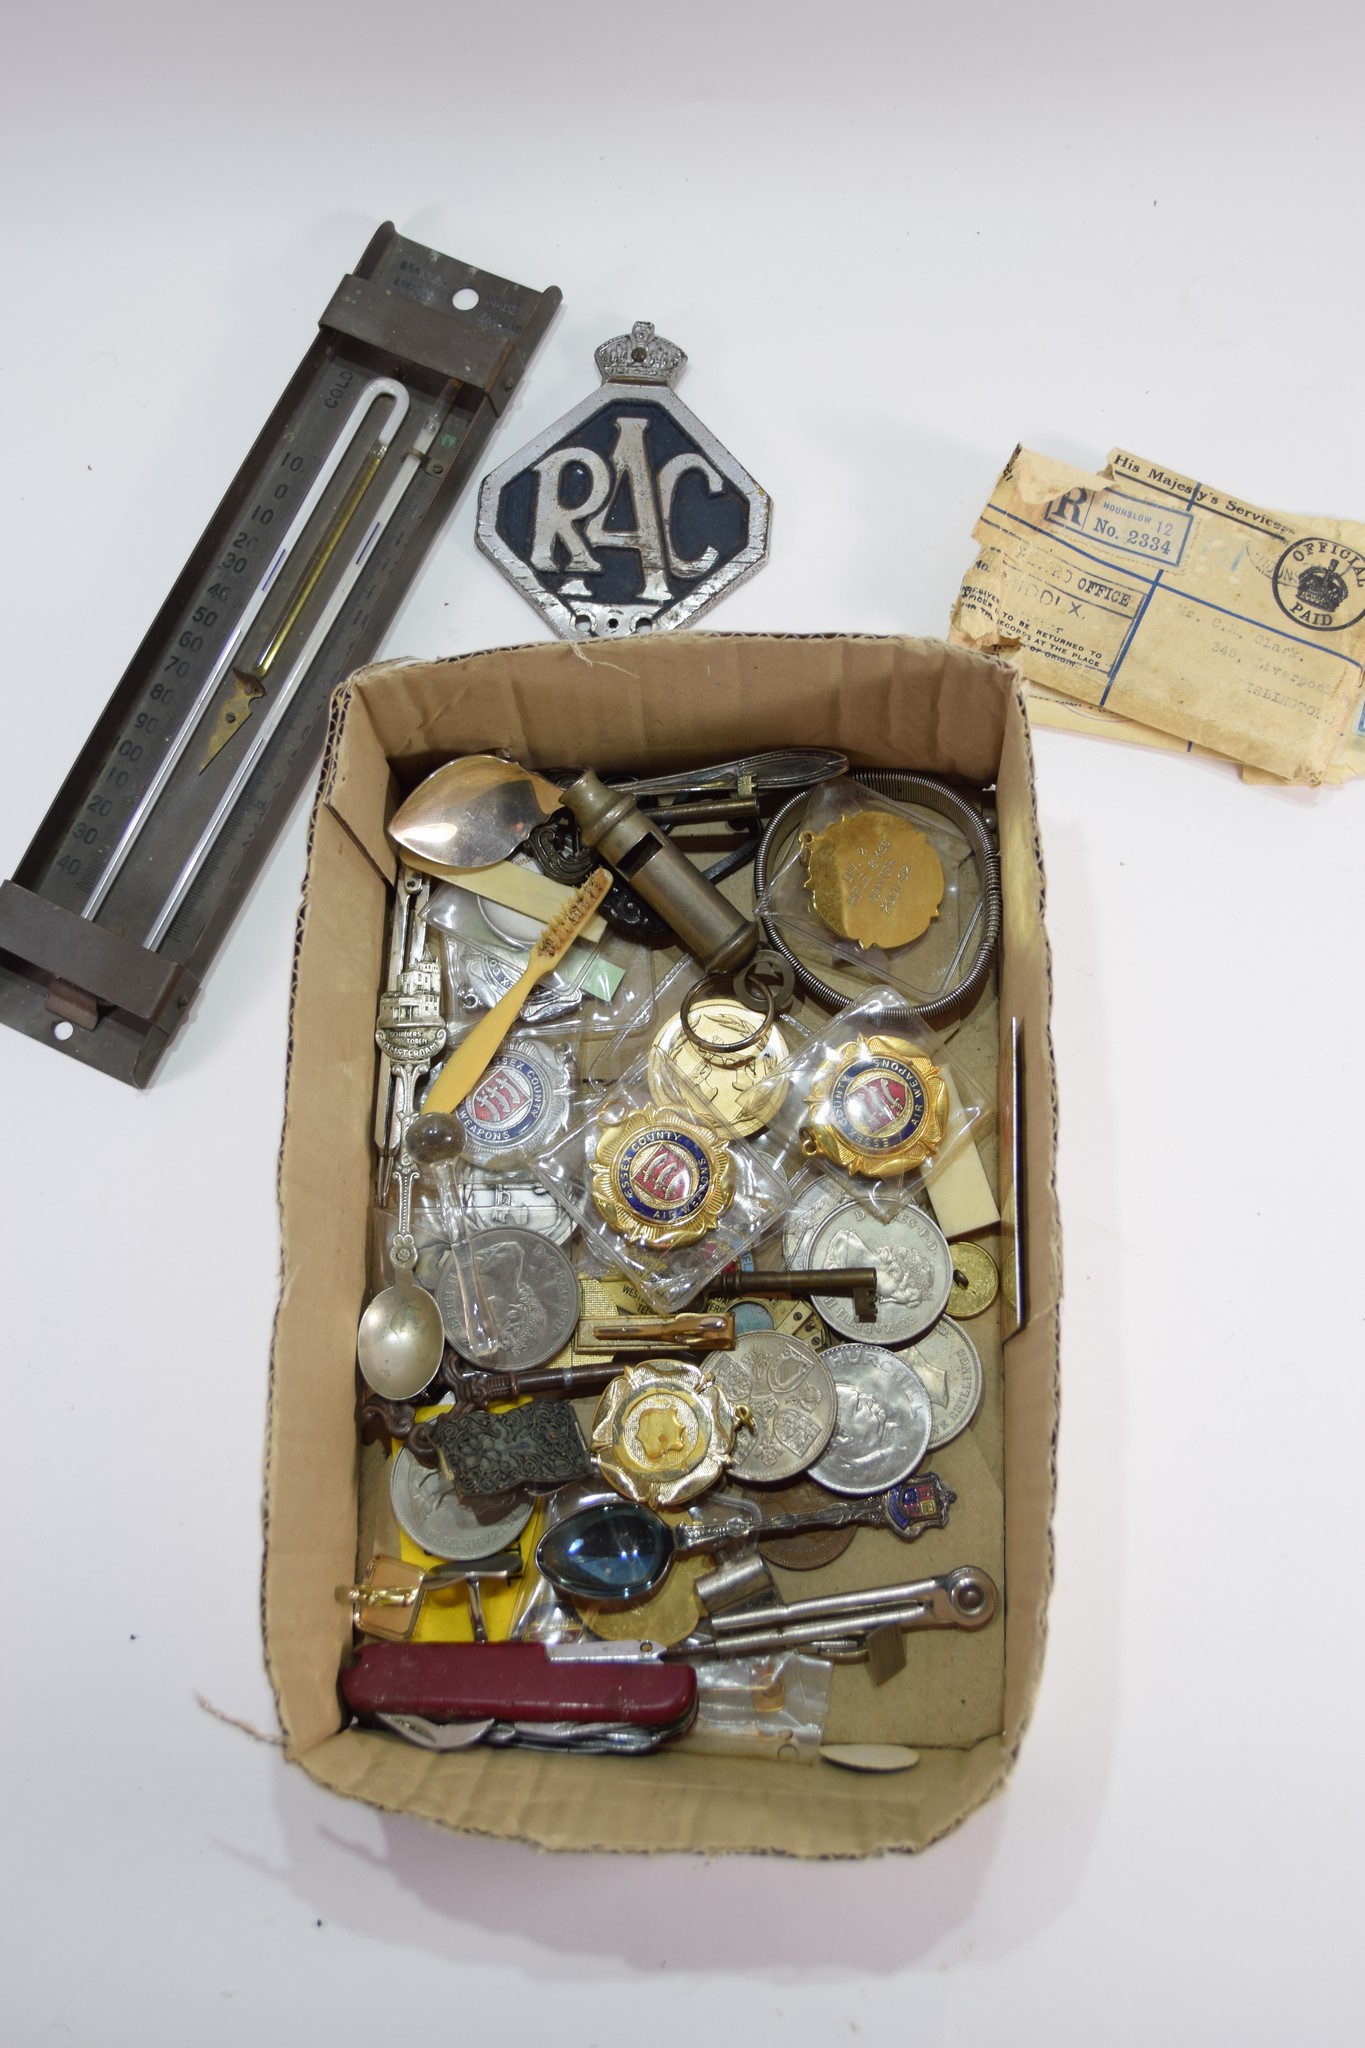 BOX VARIOUS COIND INCLUDING CHURCHILL CROWNS TOGETHER WITH RIFEL SHOOTING AWARD WHISTLE AND OTHER